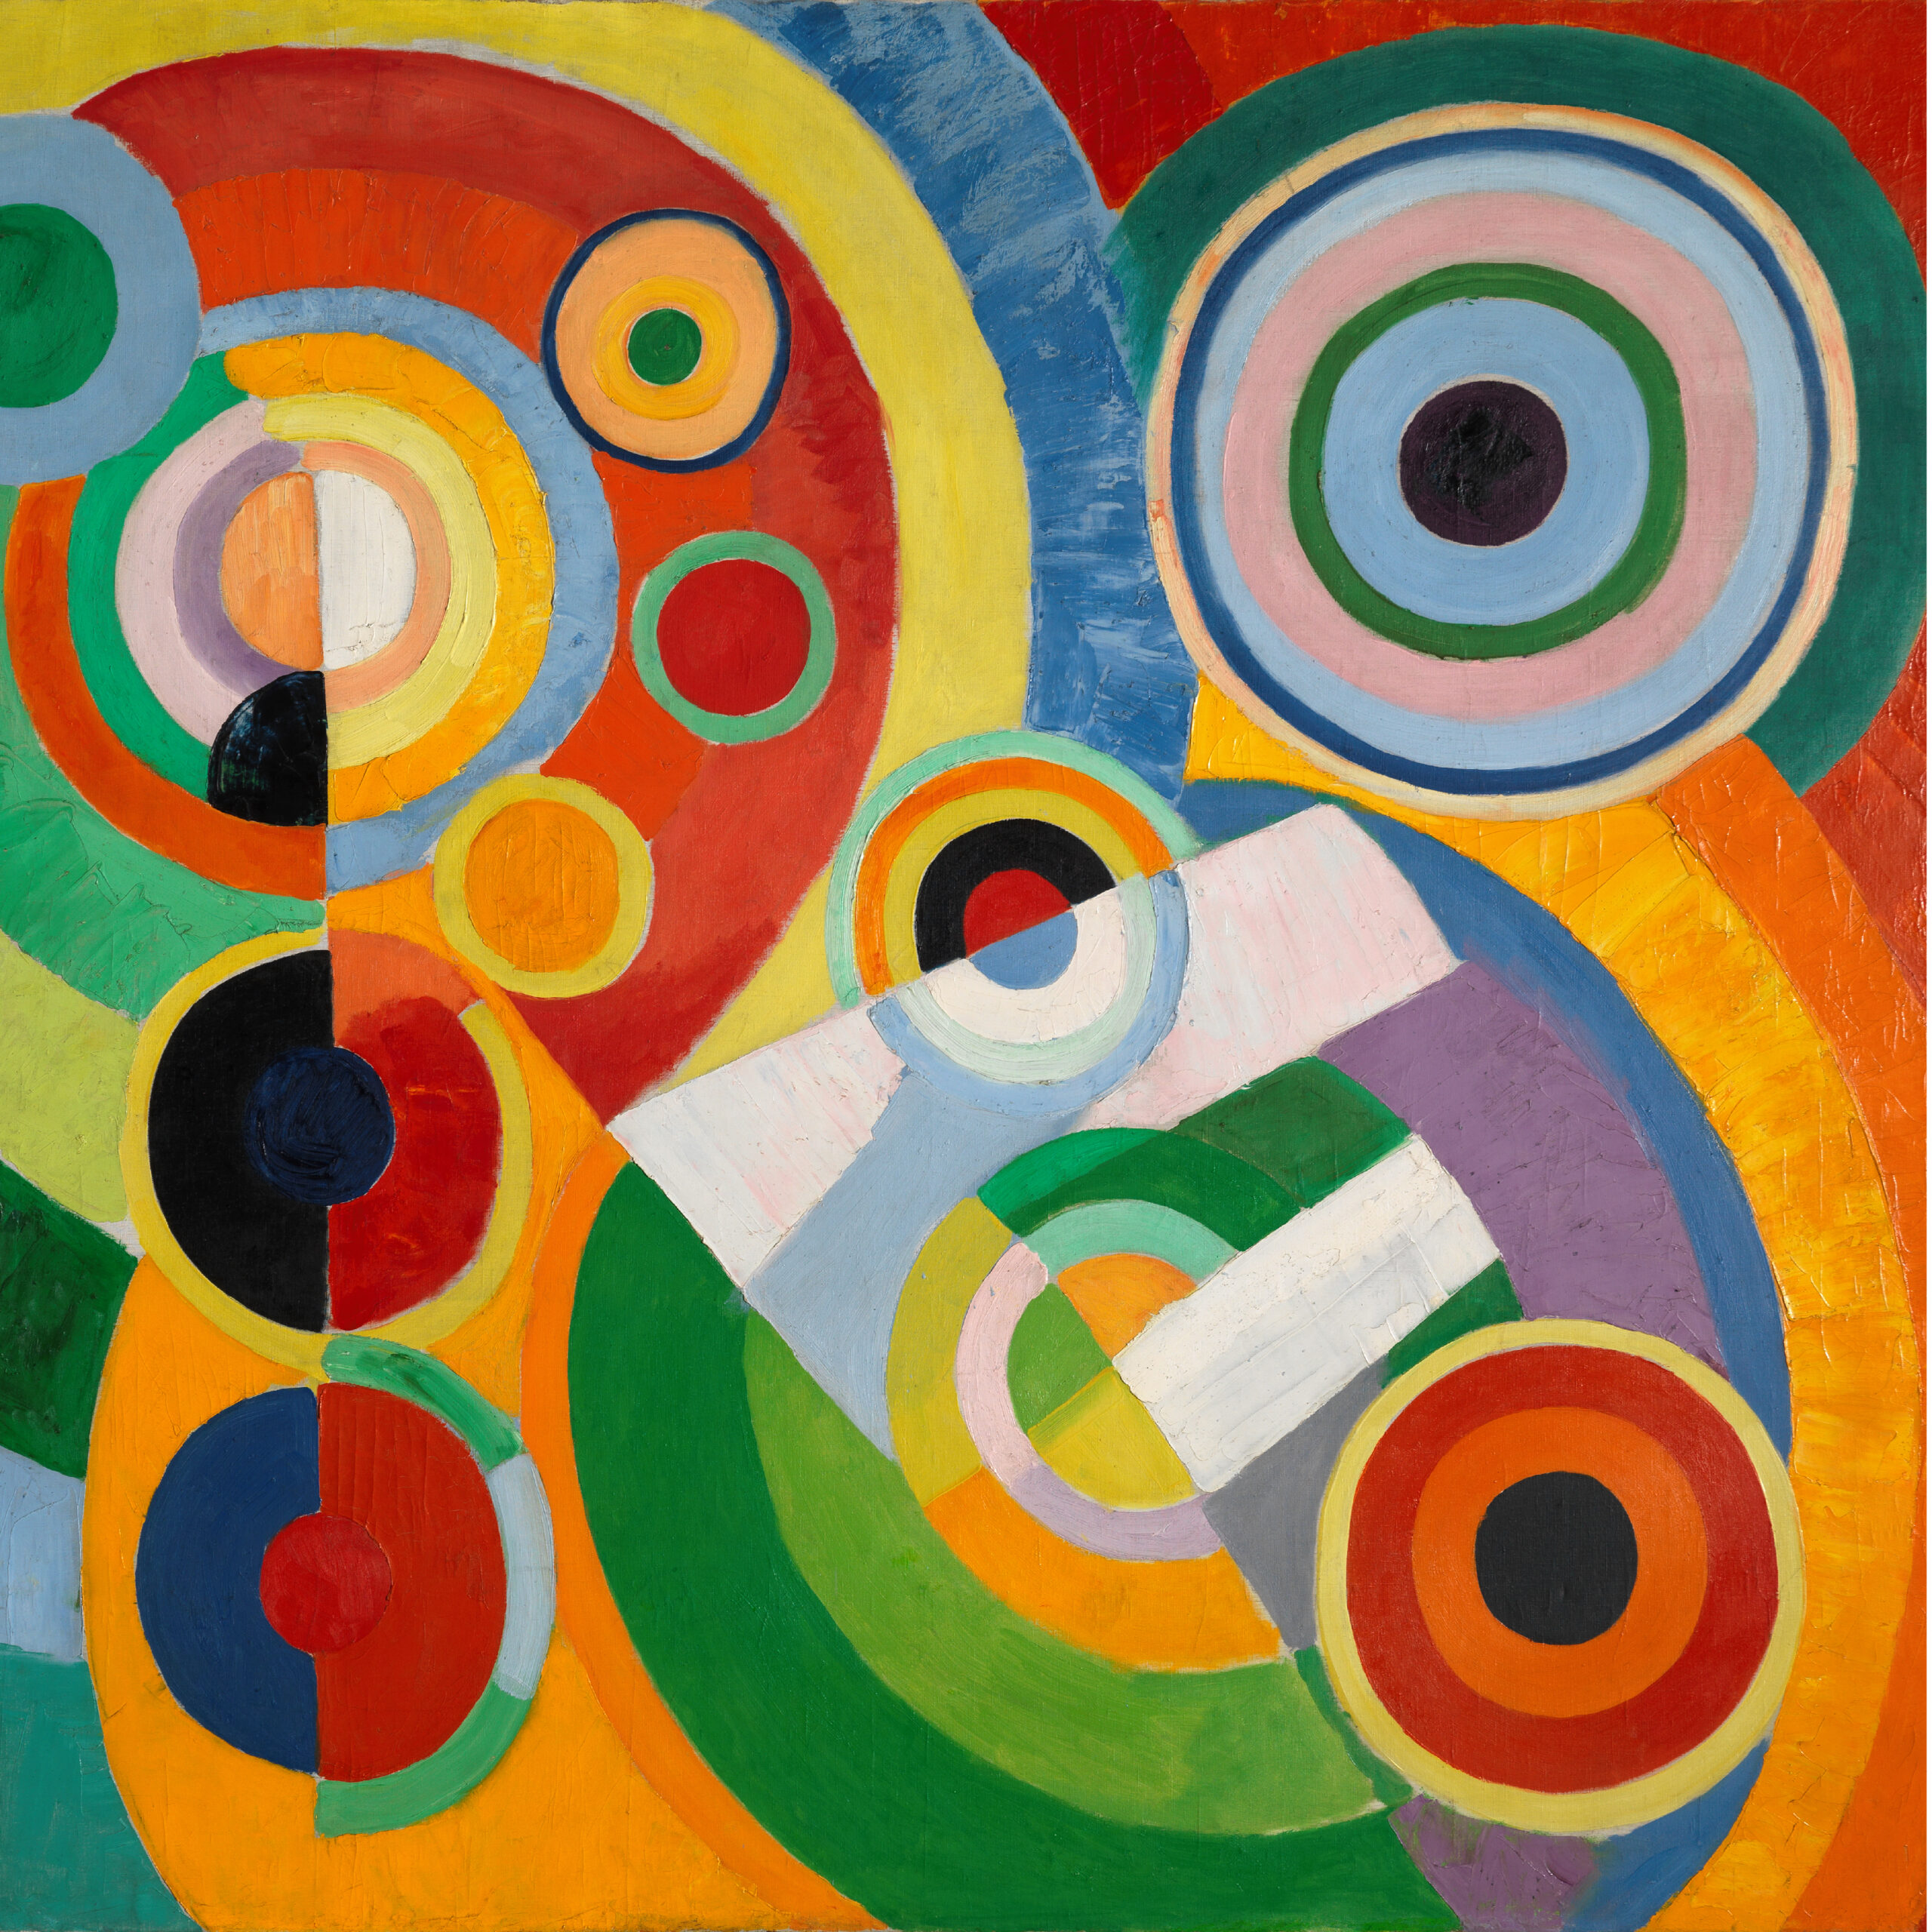 Oeuvre Rythme Delaunay